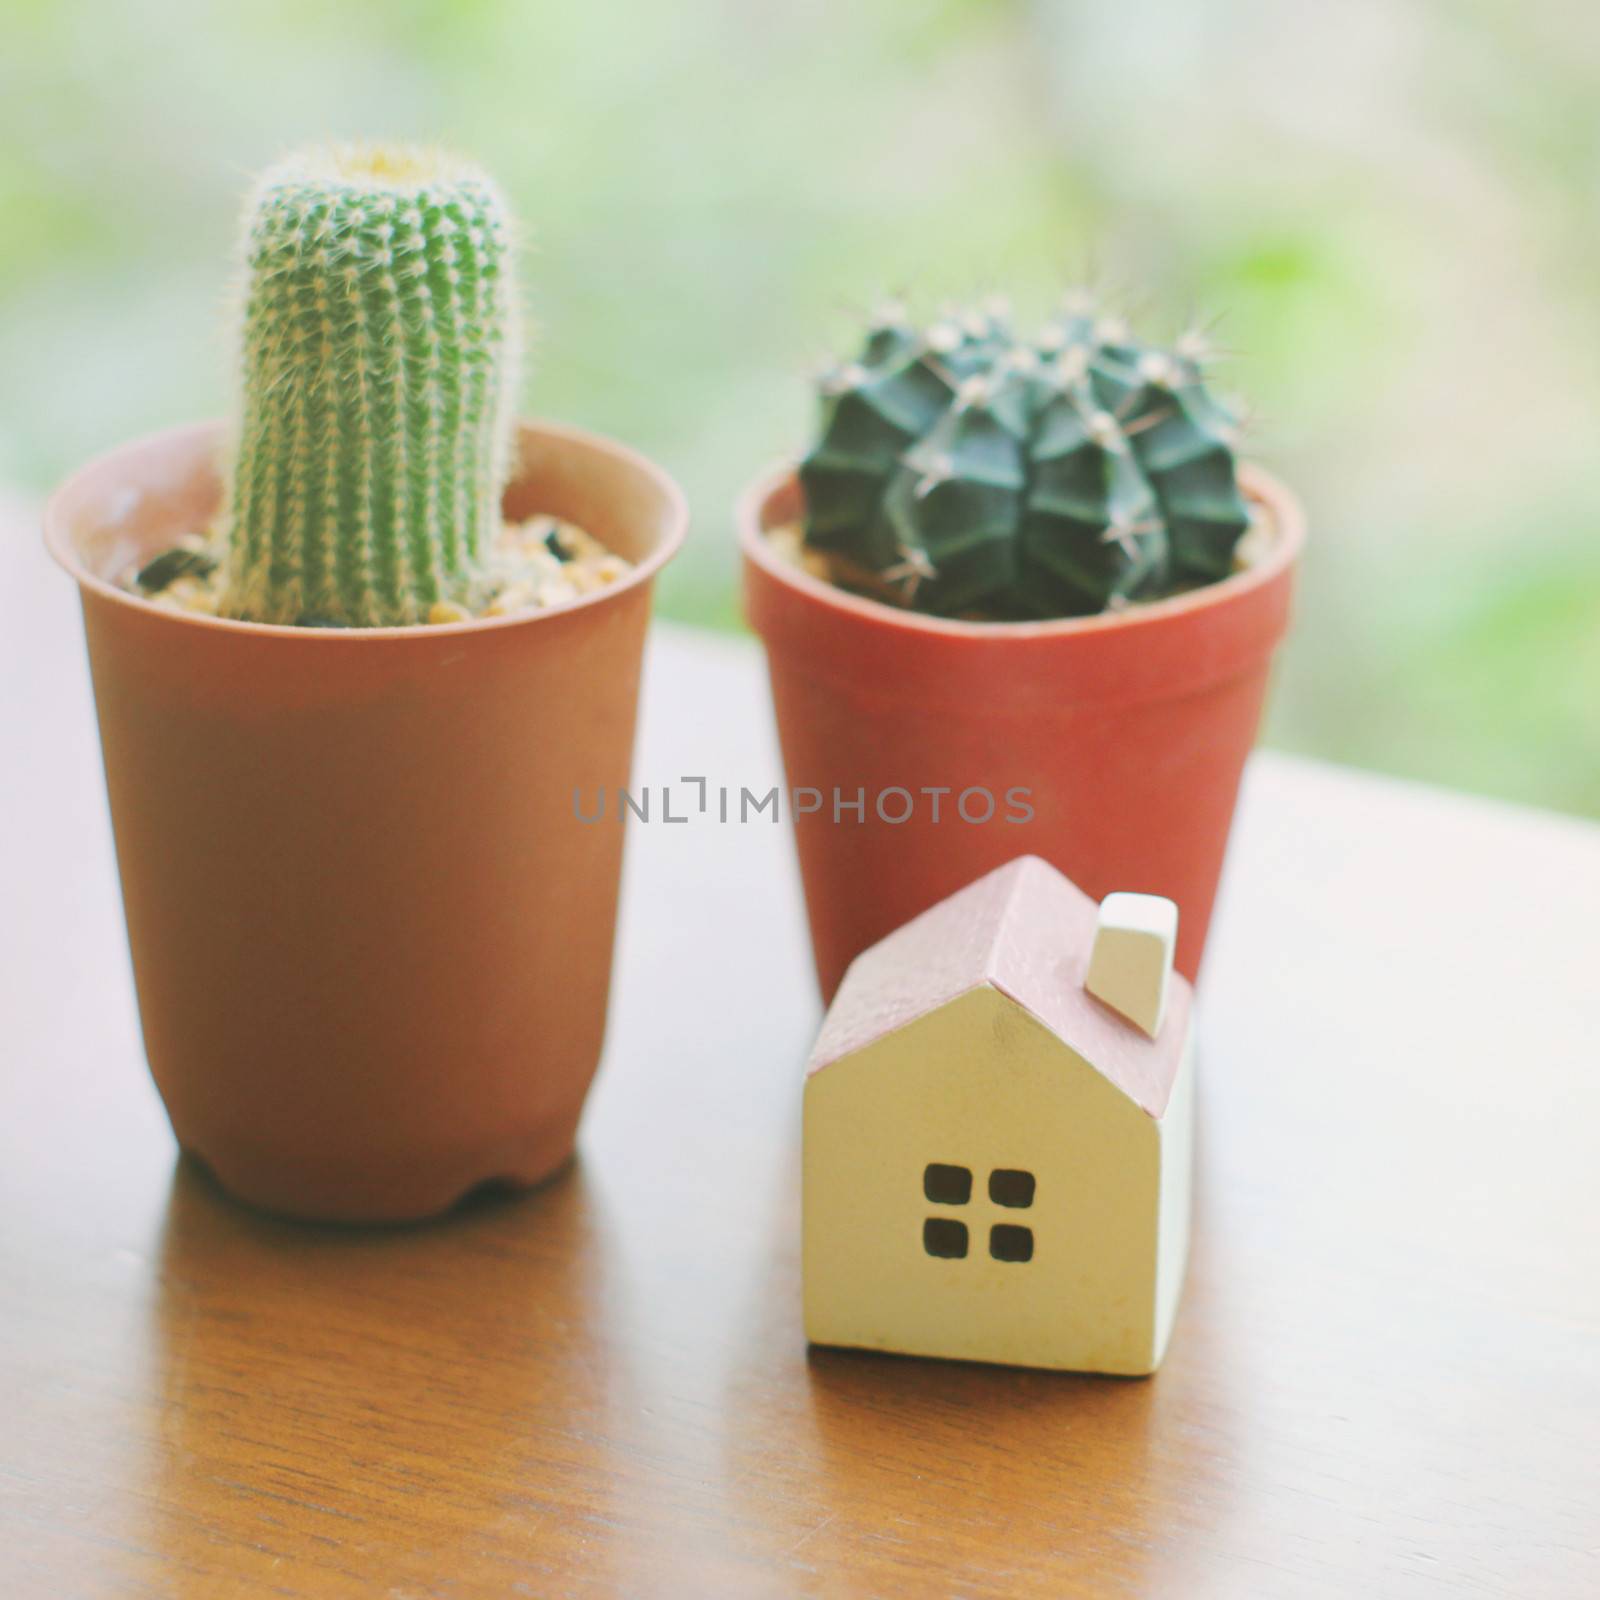 Cactus with small house for decorated, retro filter effect by nuchylee